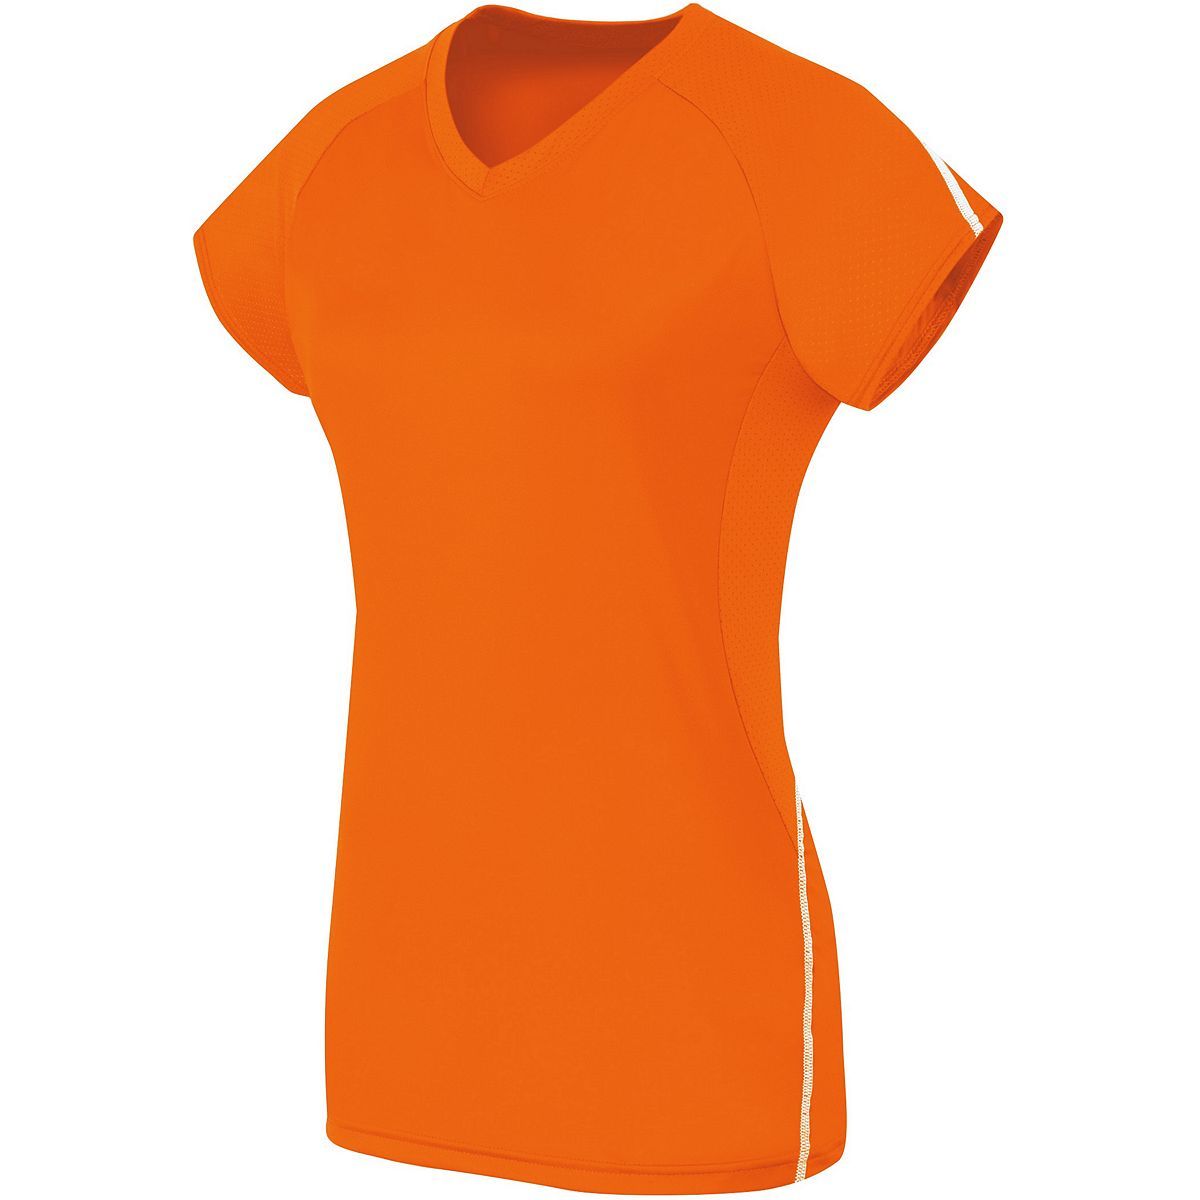 High 5 Ladies Short Sleeve Solid Jersey in Orange/White  -Part of the Ladies, Ladies-Jersey, High5-Products, Volleyball, Shirts product lines at KanaleyCreations.com